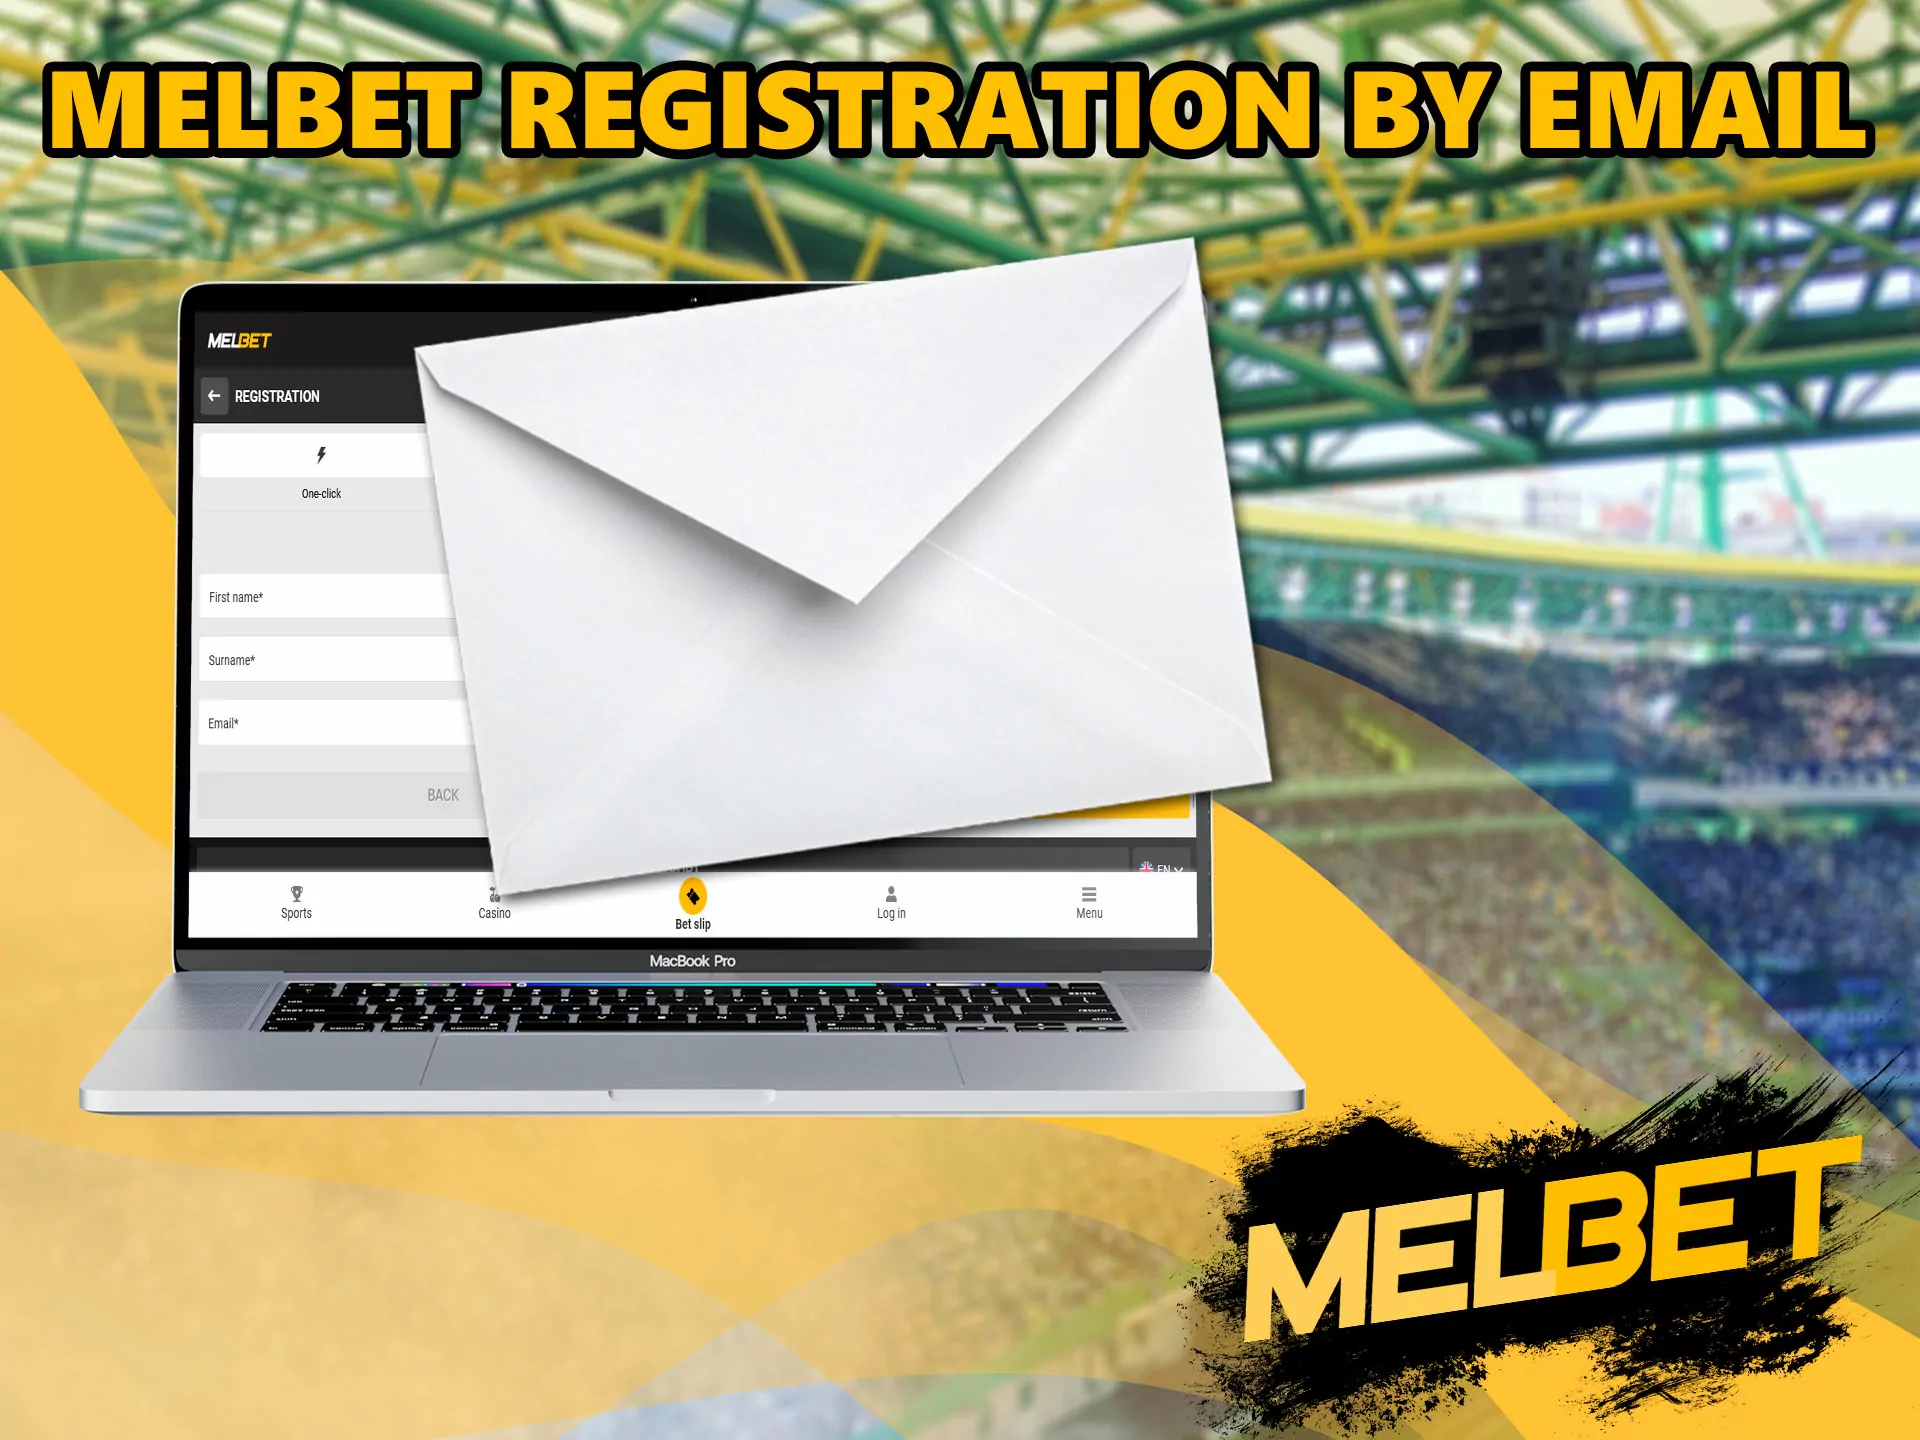 This is a rather lengthy form of registration, but it reduces the amount of information that must be entered during registration, below you will find detailed information about this method.